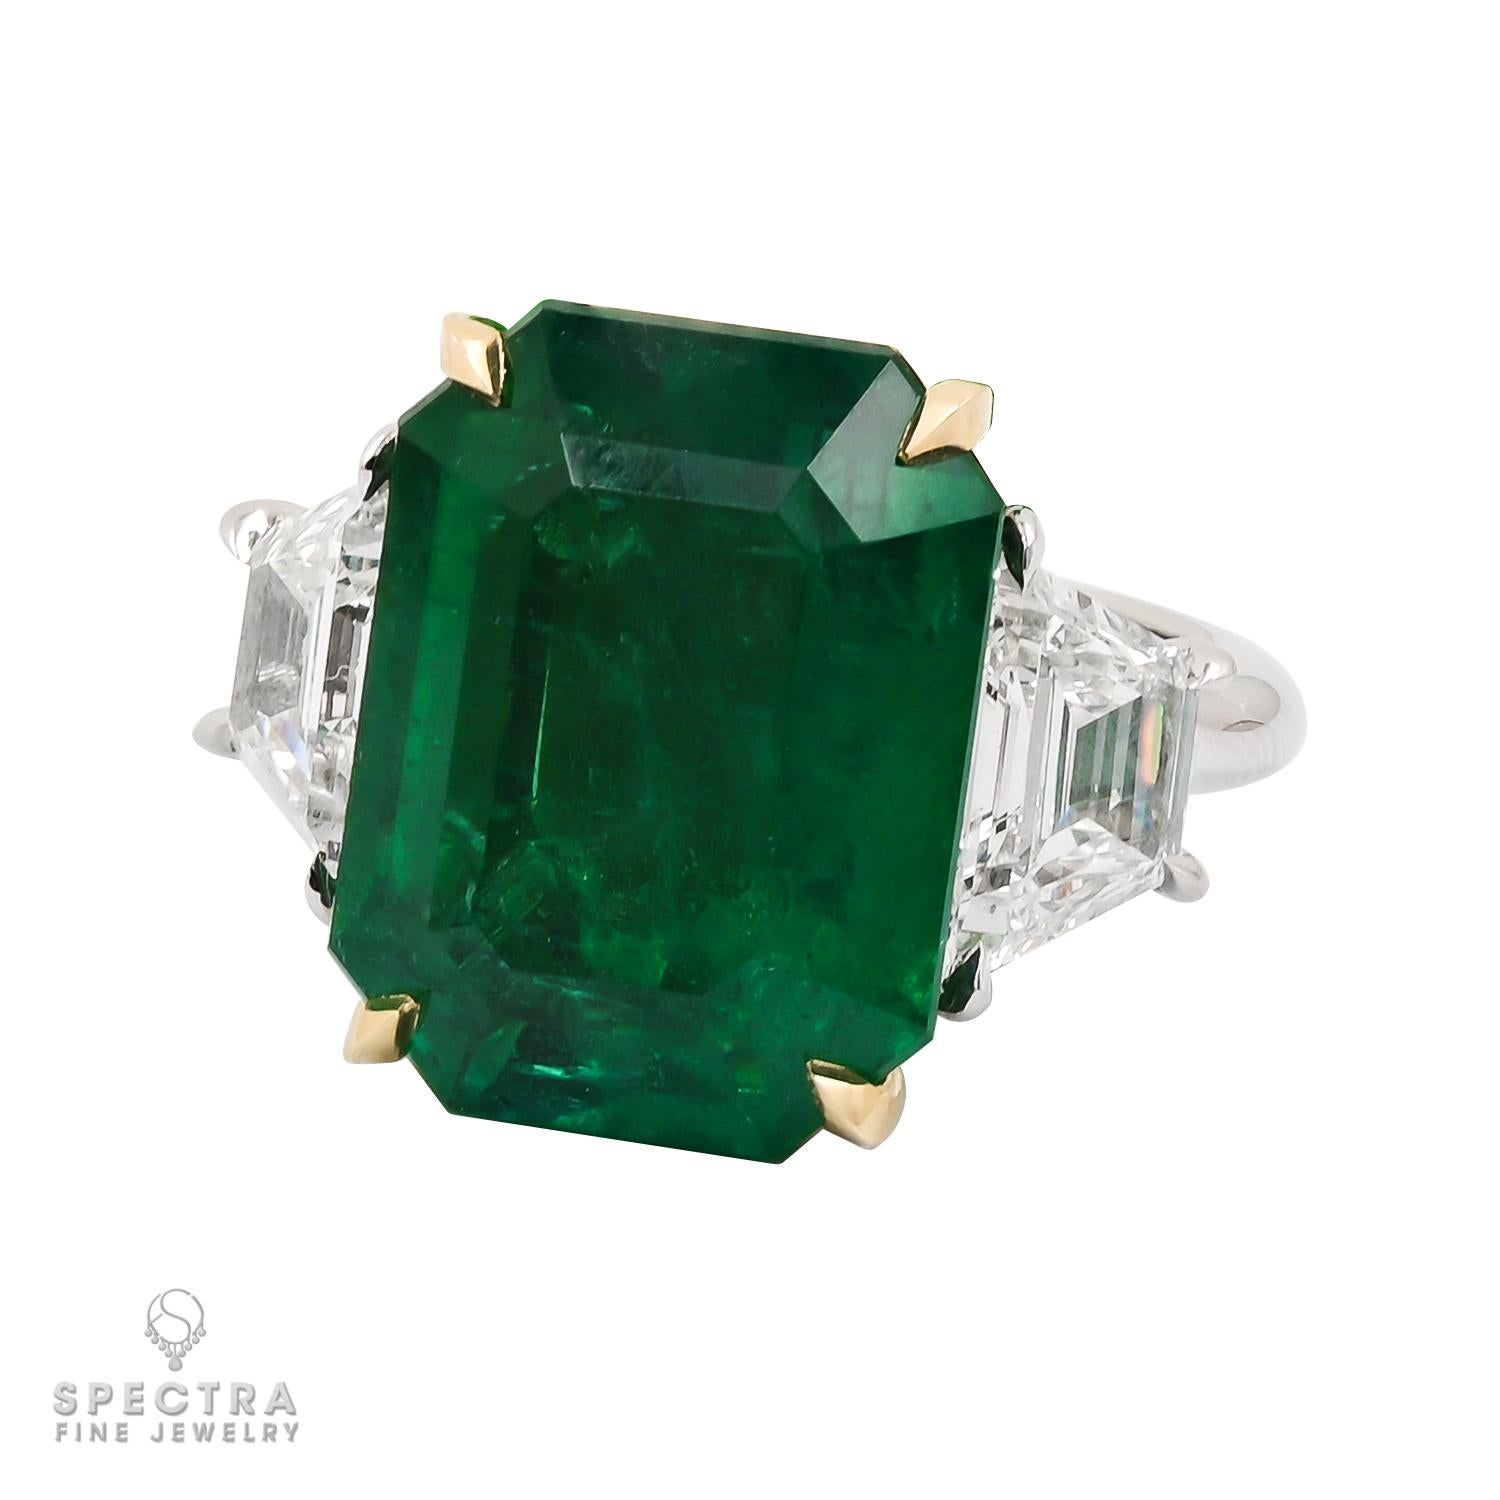 This Contemporary Emerald Diamond Engagement/Cocktail Ring showcases the allure of an emerald-cut green emerald, renowned for its clean lines and vibrant color. The emerald's elongated shape and flattened table facet, reflecting its hexagonal